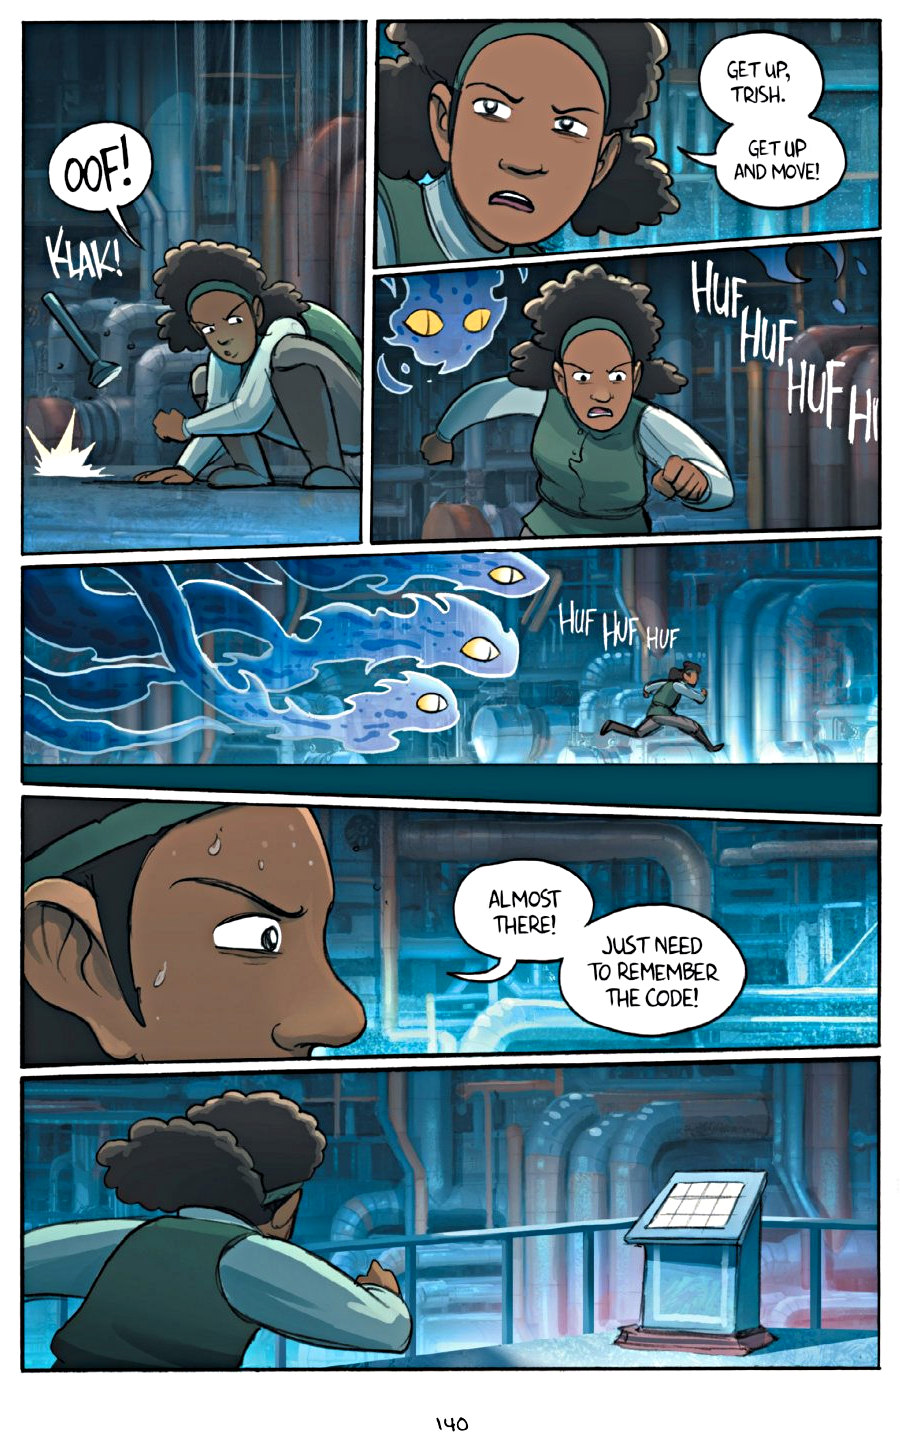 page 140 of amulet 6 escape from lucien graphic novel